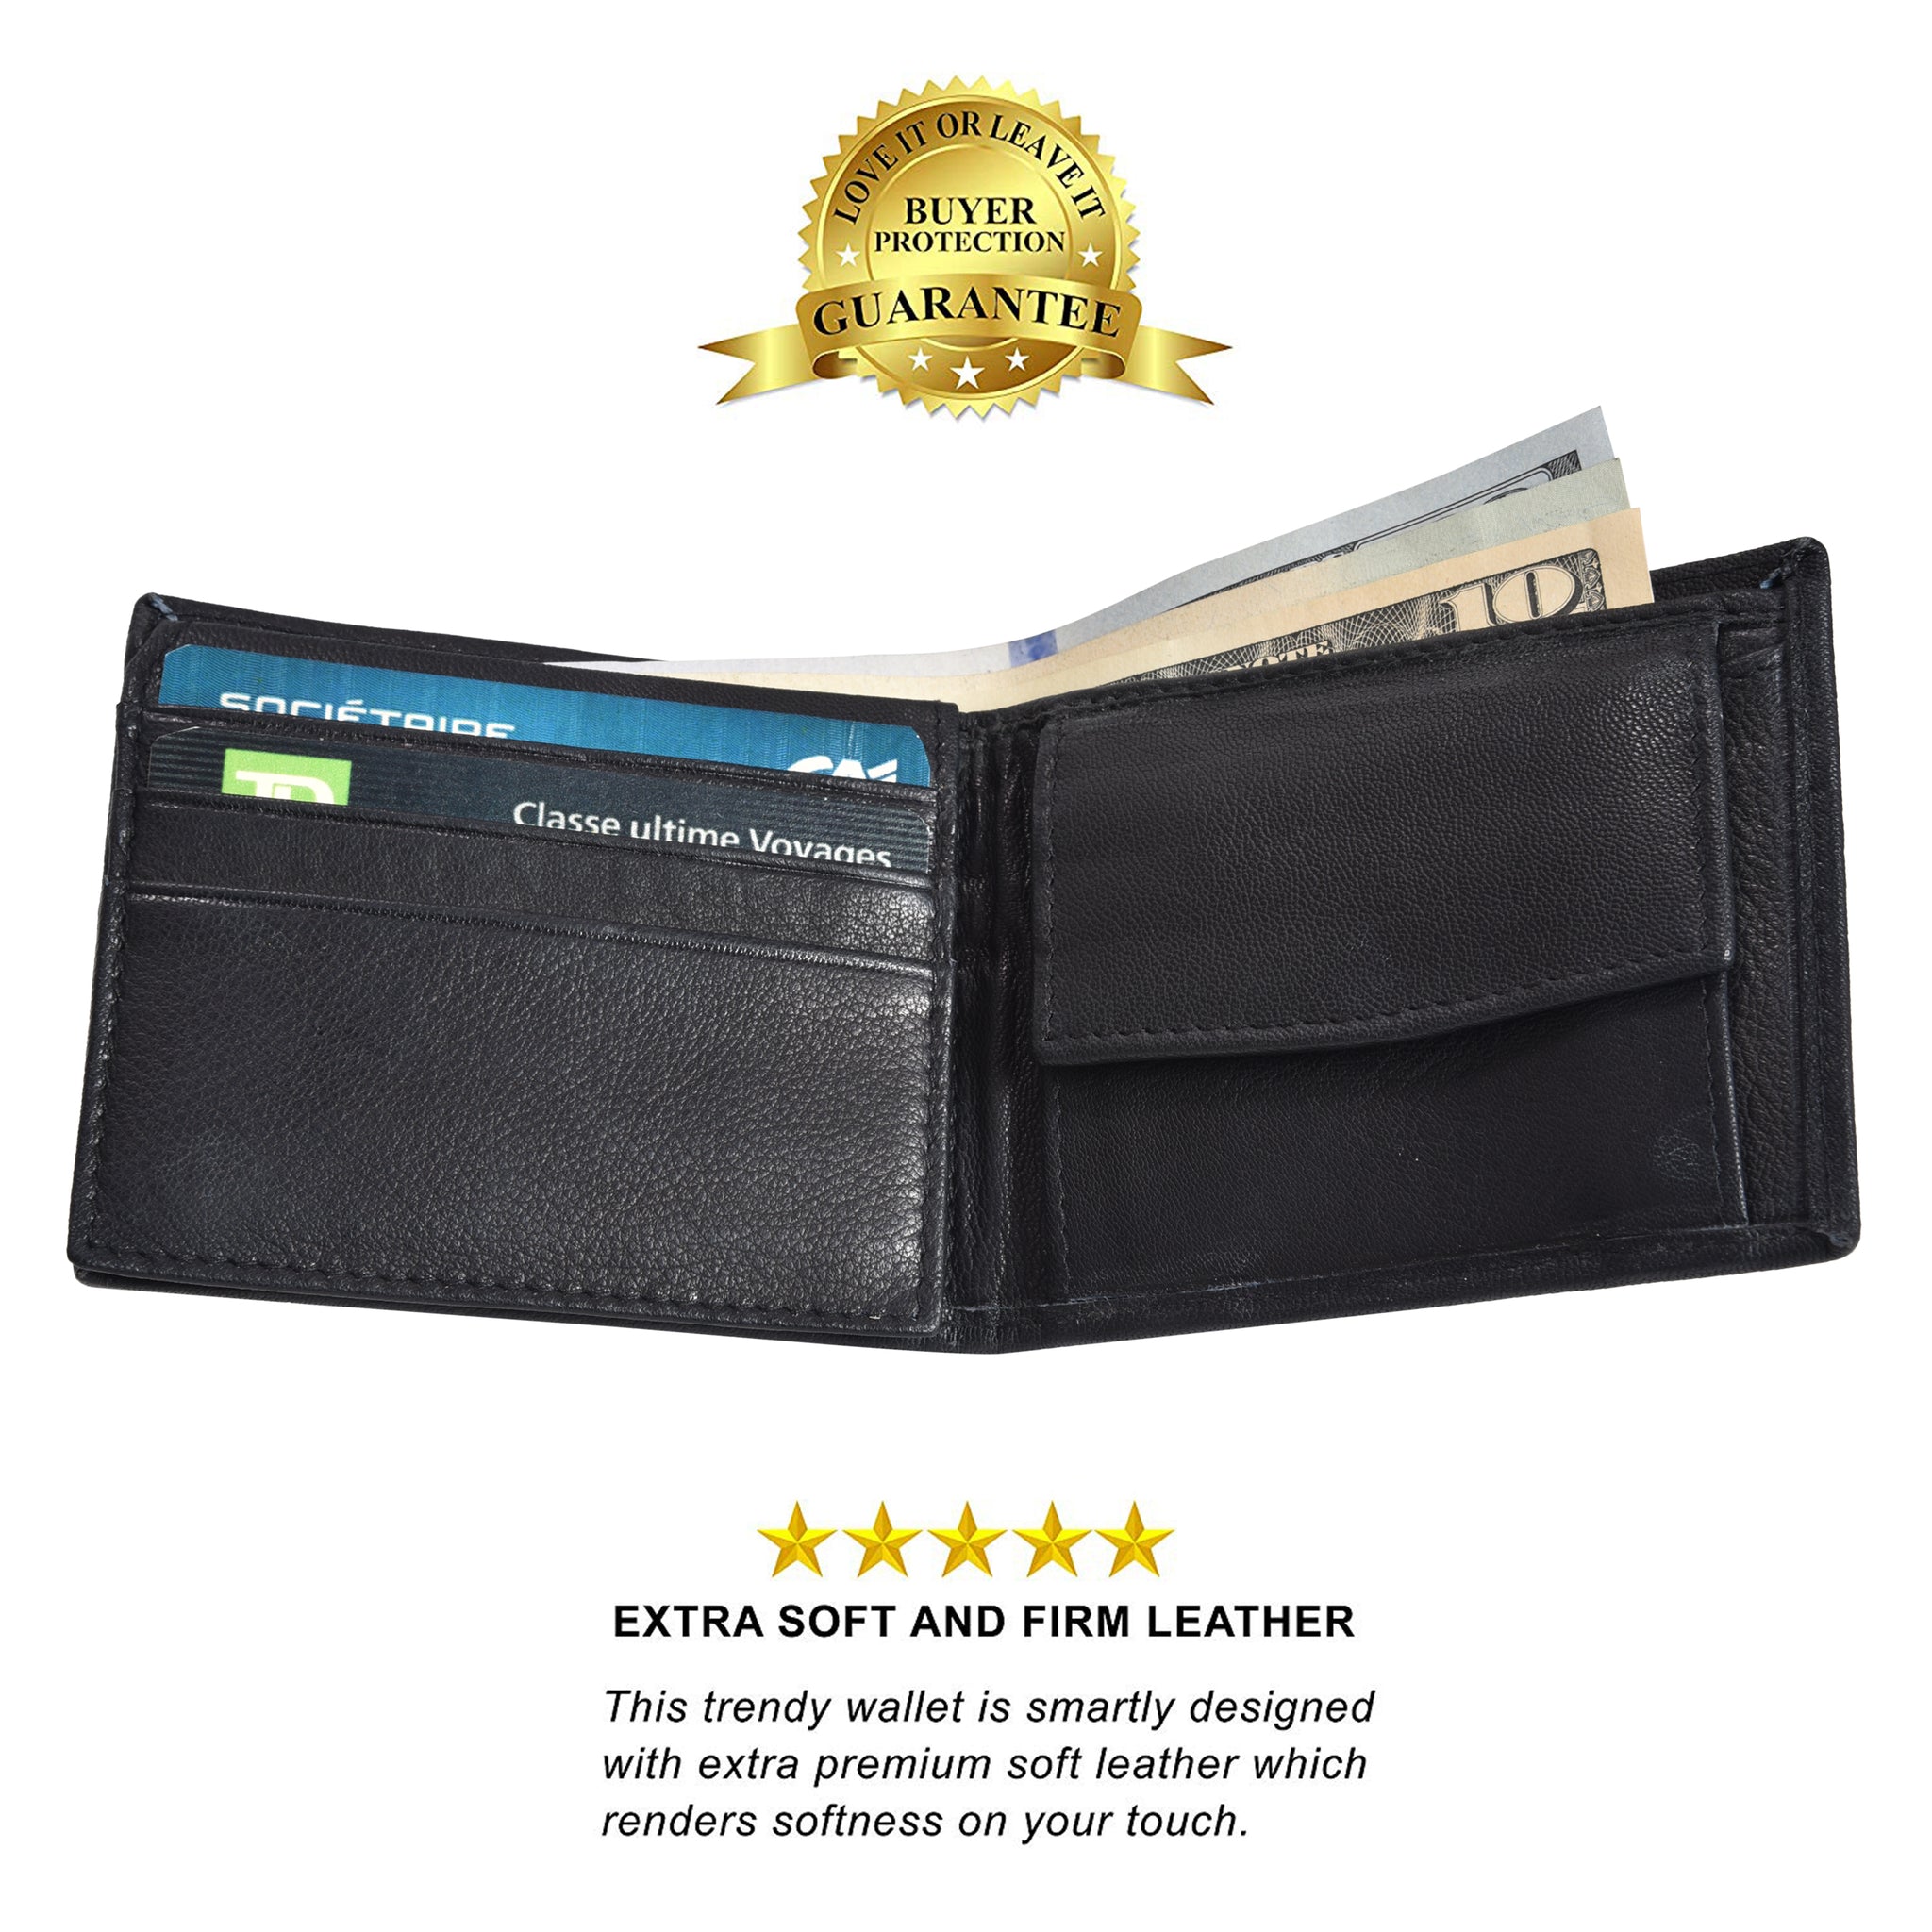 Leatherboss Genuine Leather Boy's Men's Compact Small Credit Card Holder Wallet